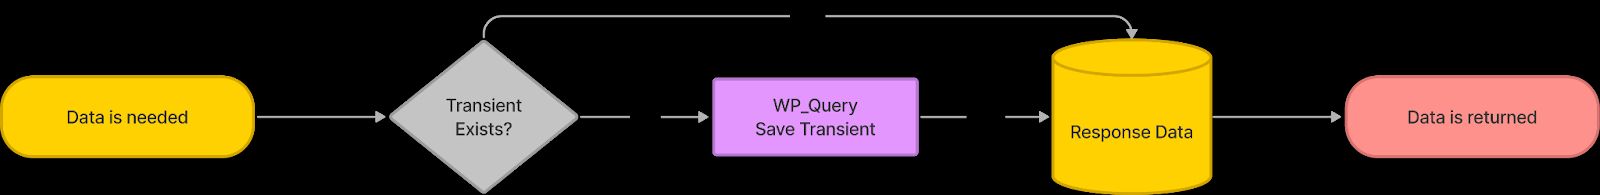 Another simple flow chart to visualize WordPress transients